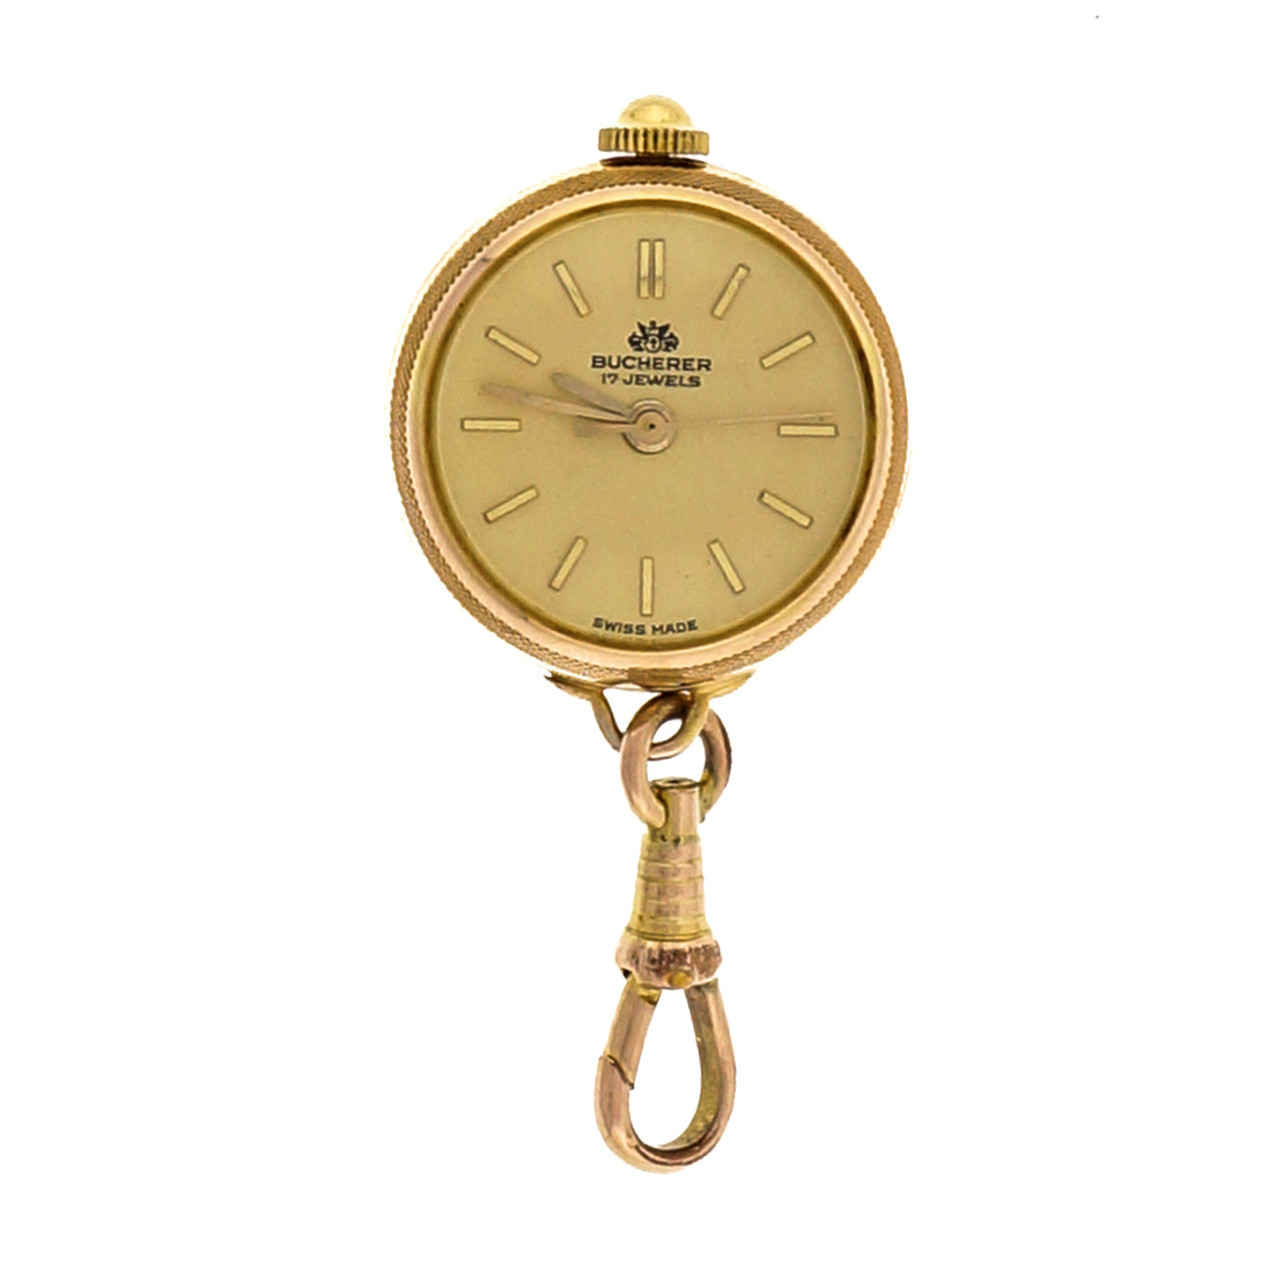 FRIENDS Limited Edition PREMIUM WATCH PENDANT / POCKET WATCH F.R.I.E.N.D.S.  4.5 cms Diameter - 24x7 eMall